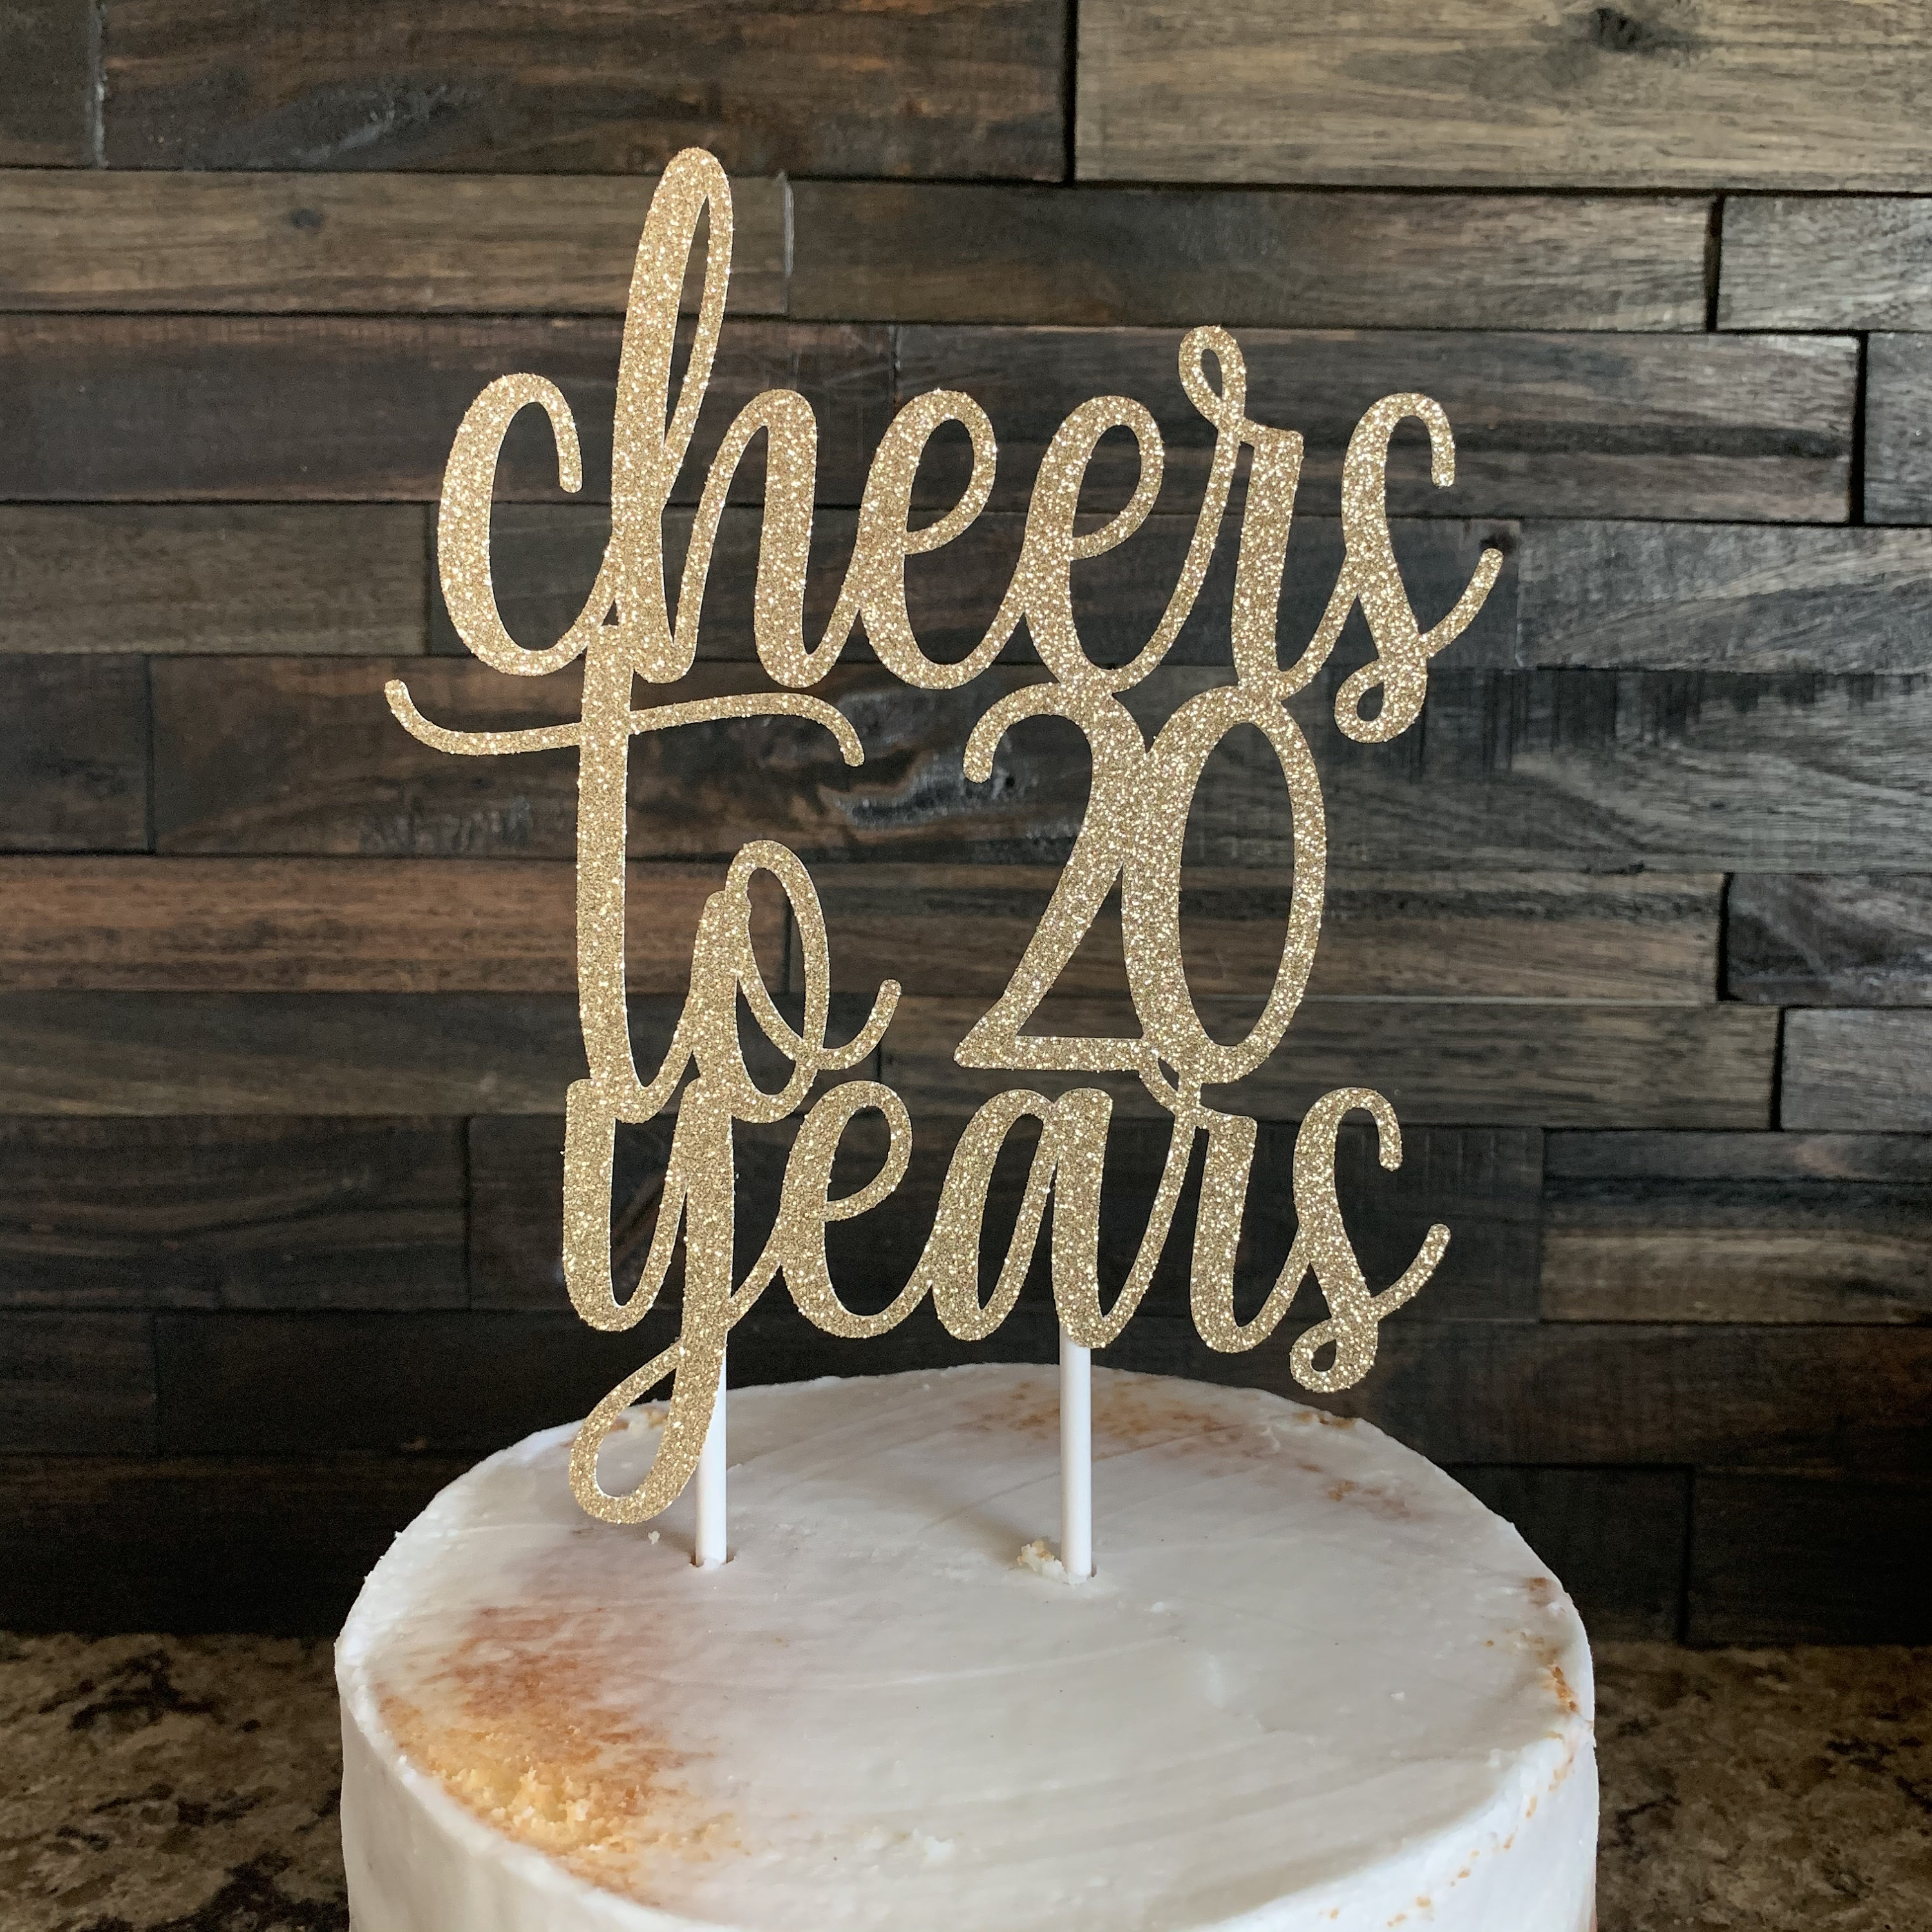 Individual Letter Cake Toppers, Single Letter Cake Topper, Alphabet Cake  Topper, Custom Cake Topper, Acrylic Cake Letters 